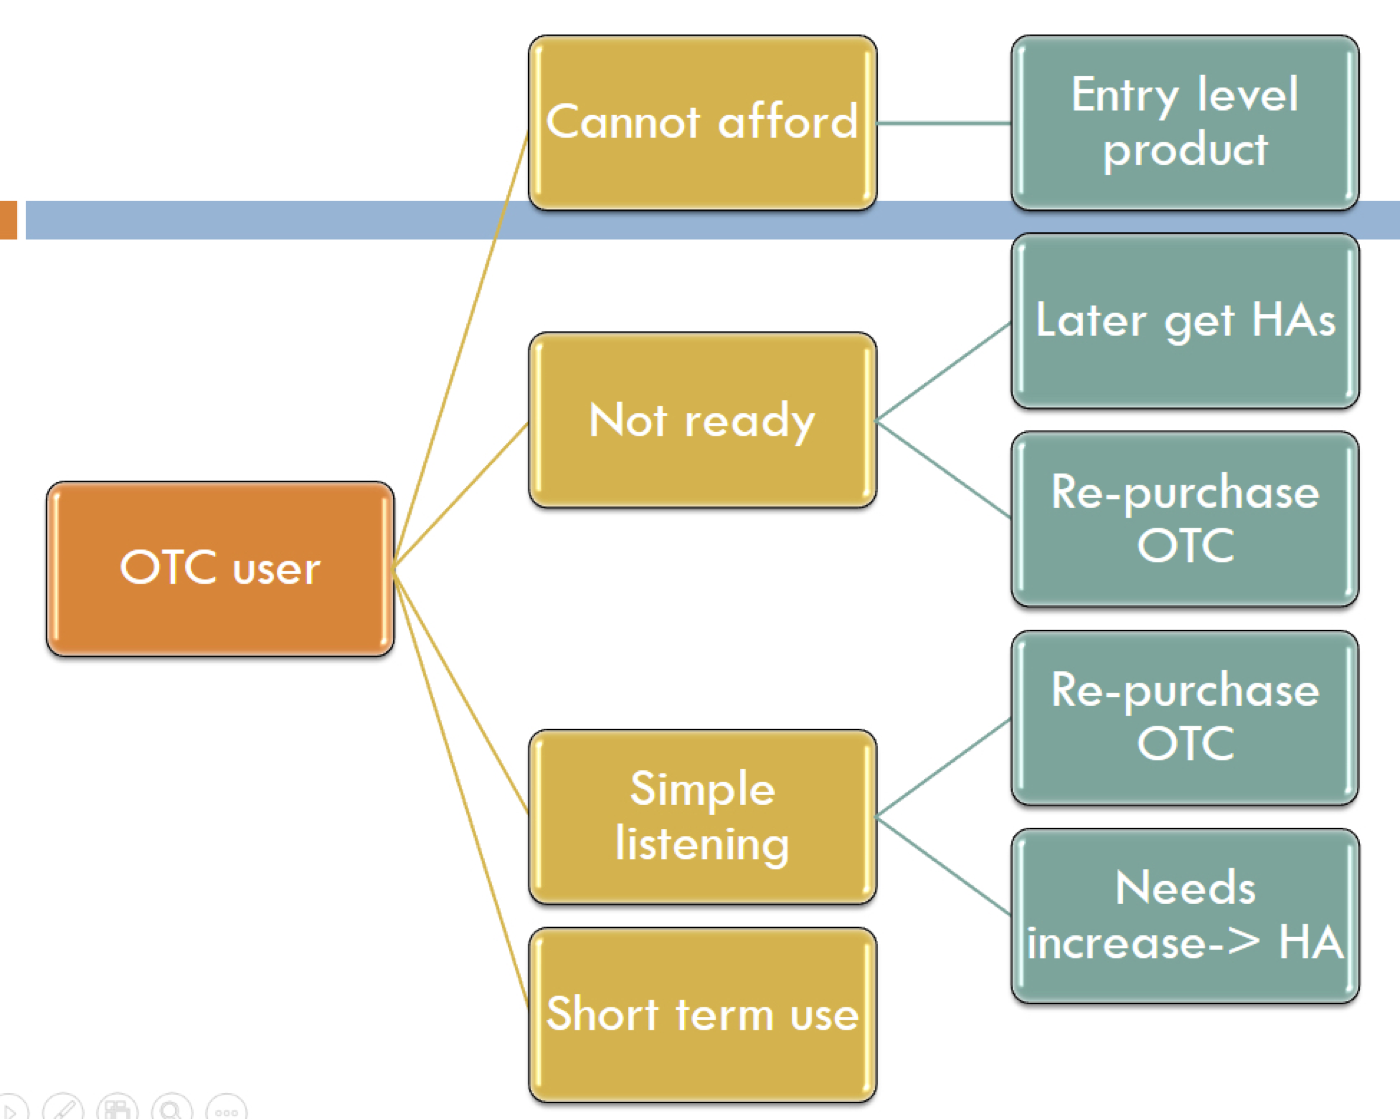 Potential path of an OTC product user